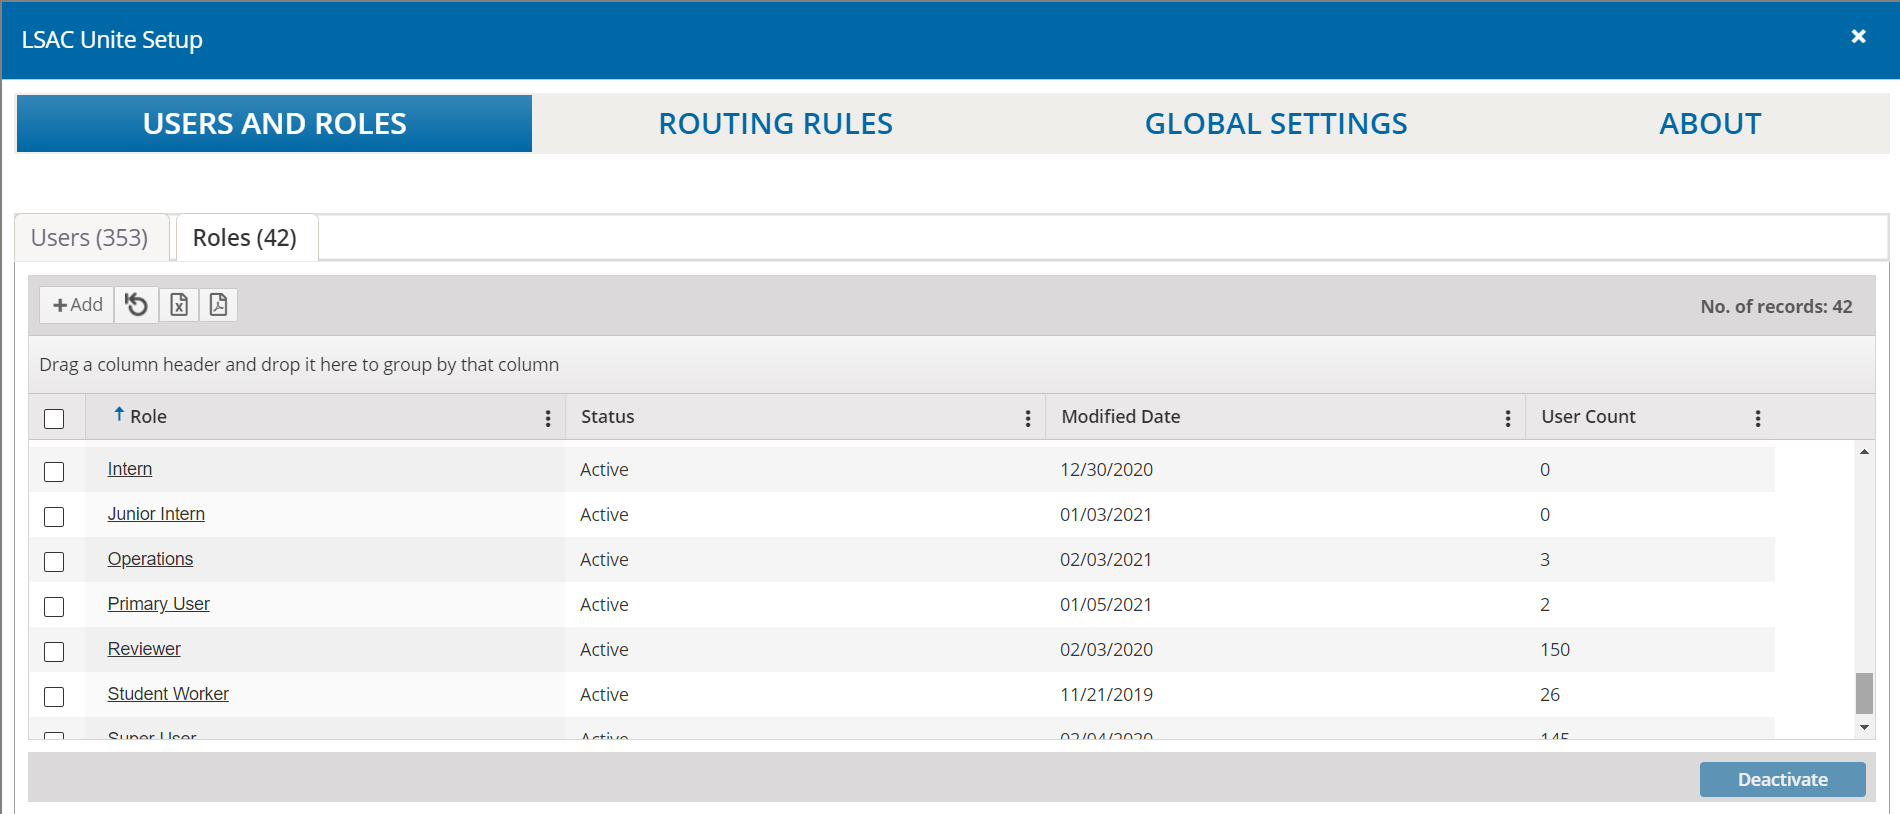 Screenshot shows Roles grid on the Users and Roles tab of the LSAC Unite Setup window.